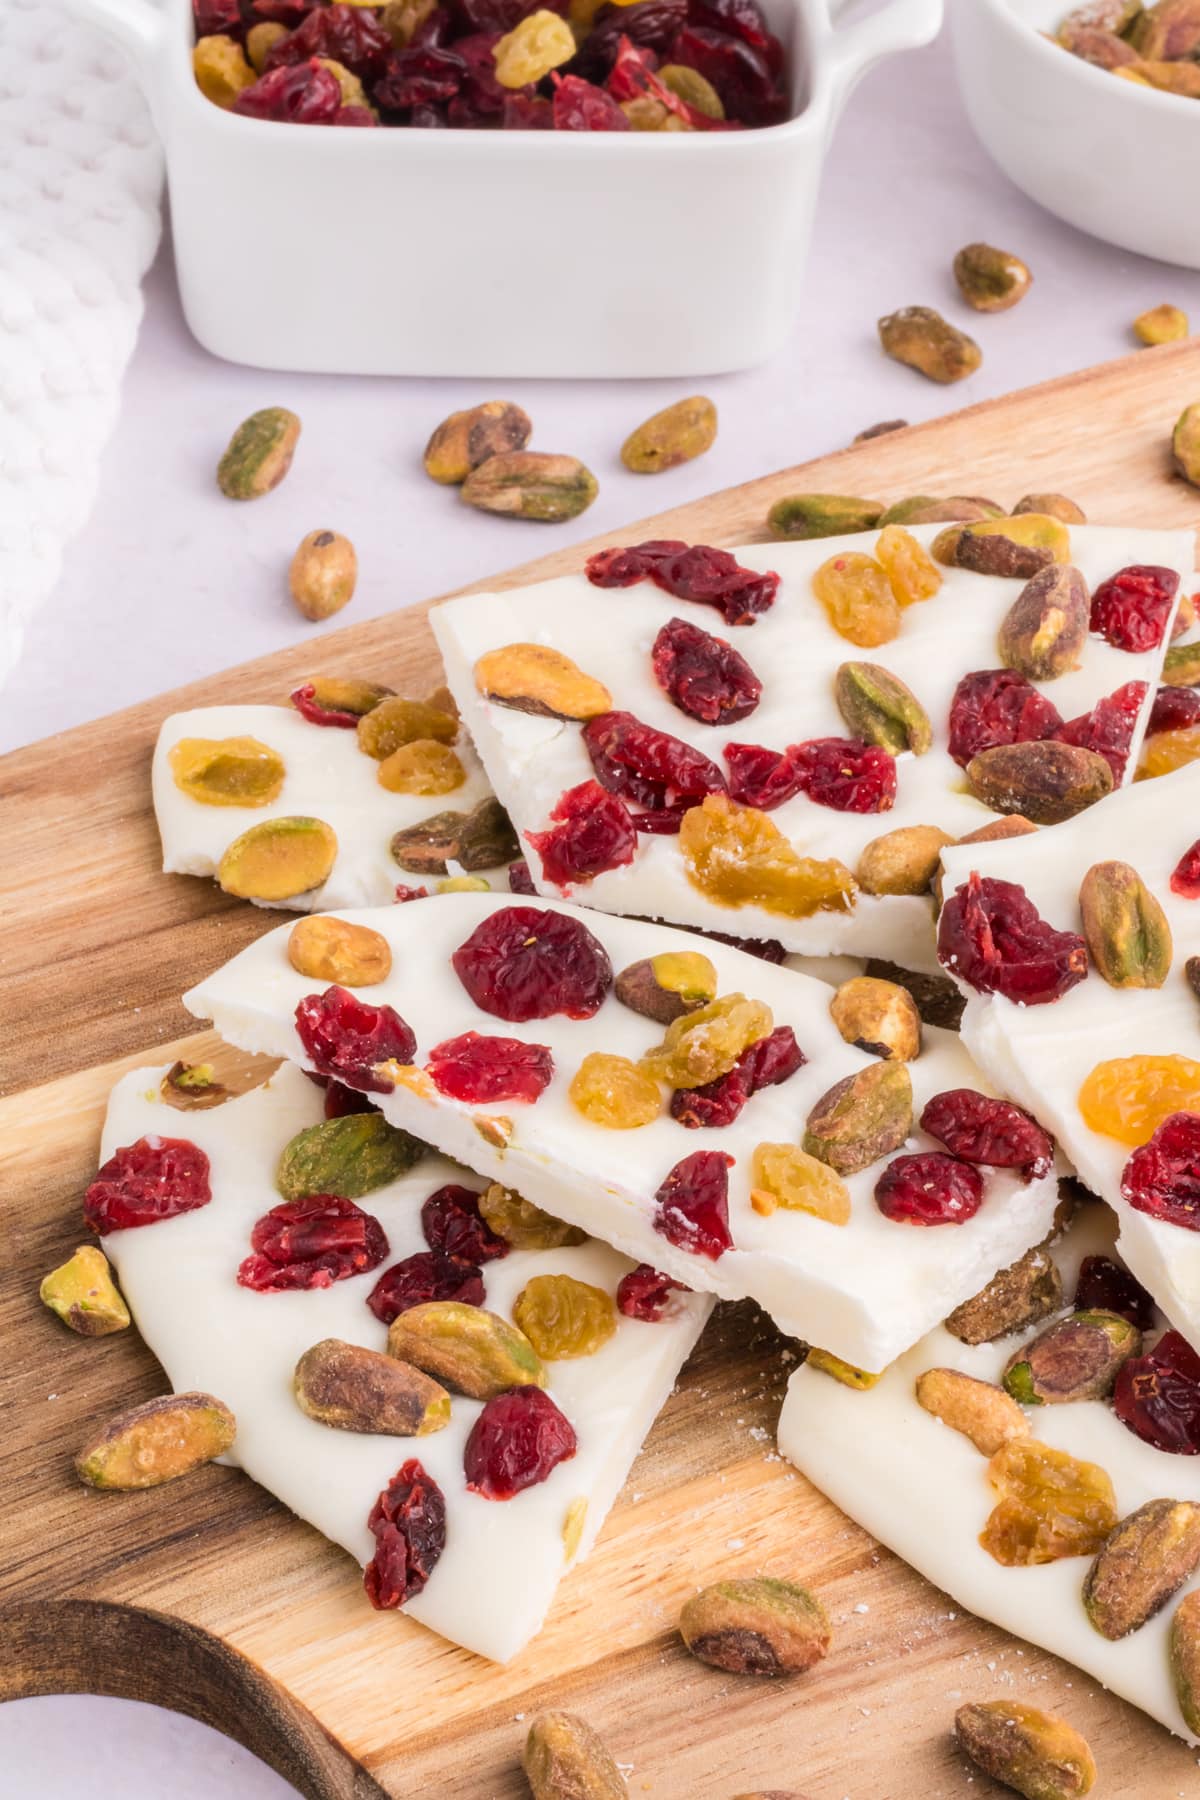 Pieces of white chocolate bark on a wood cutting board.